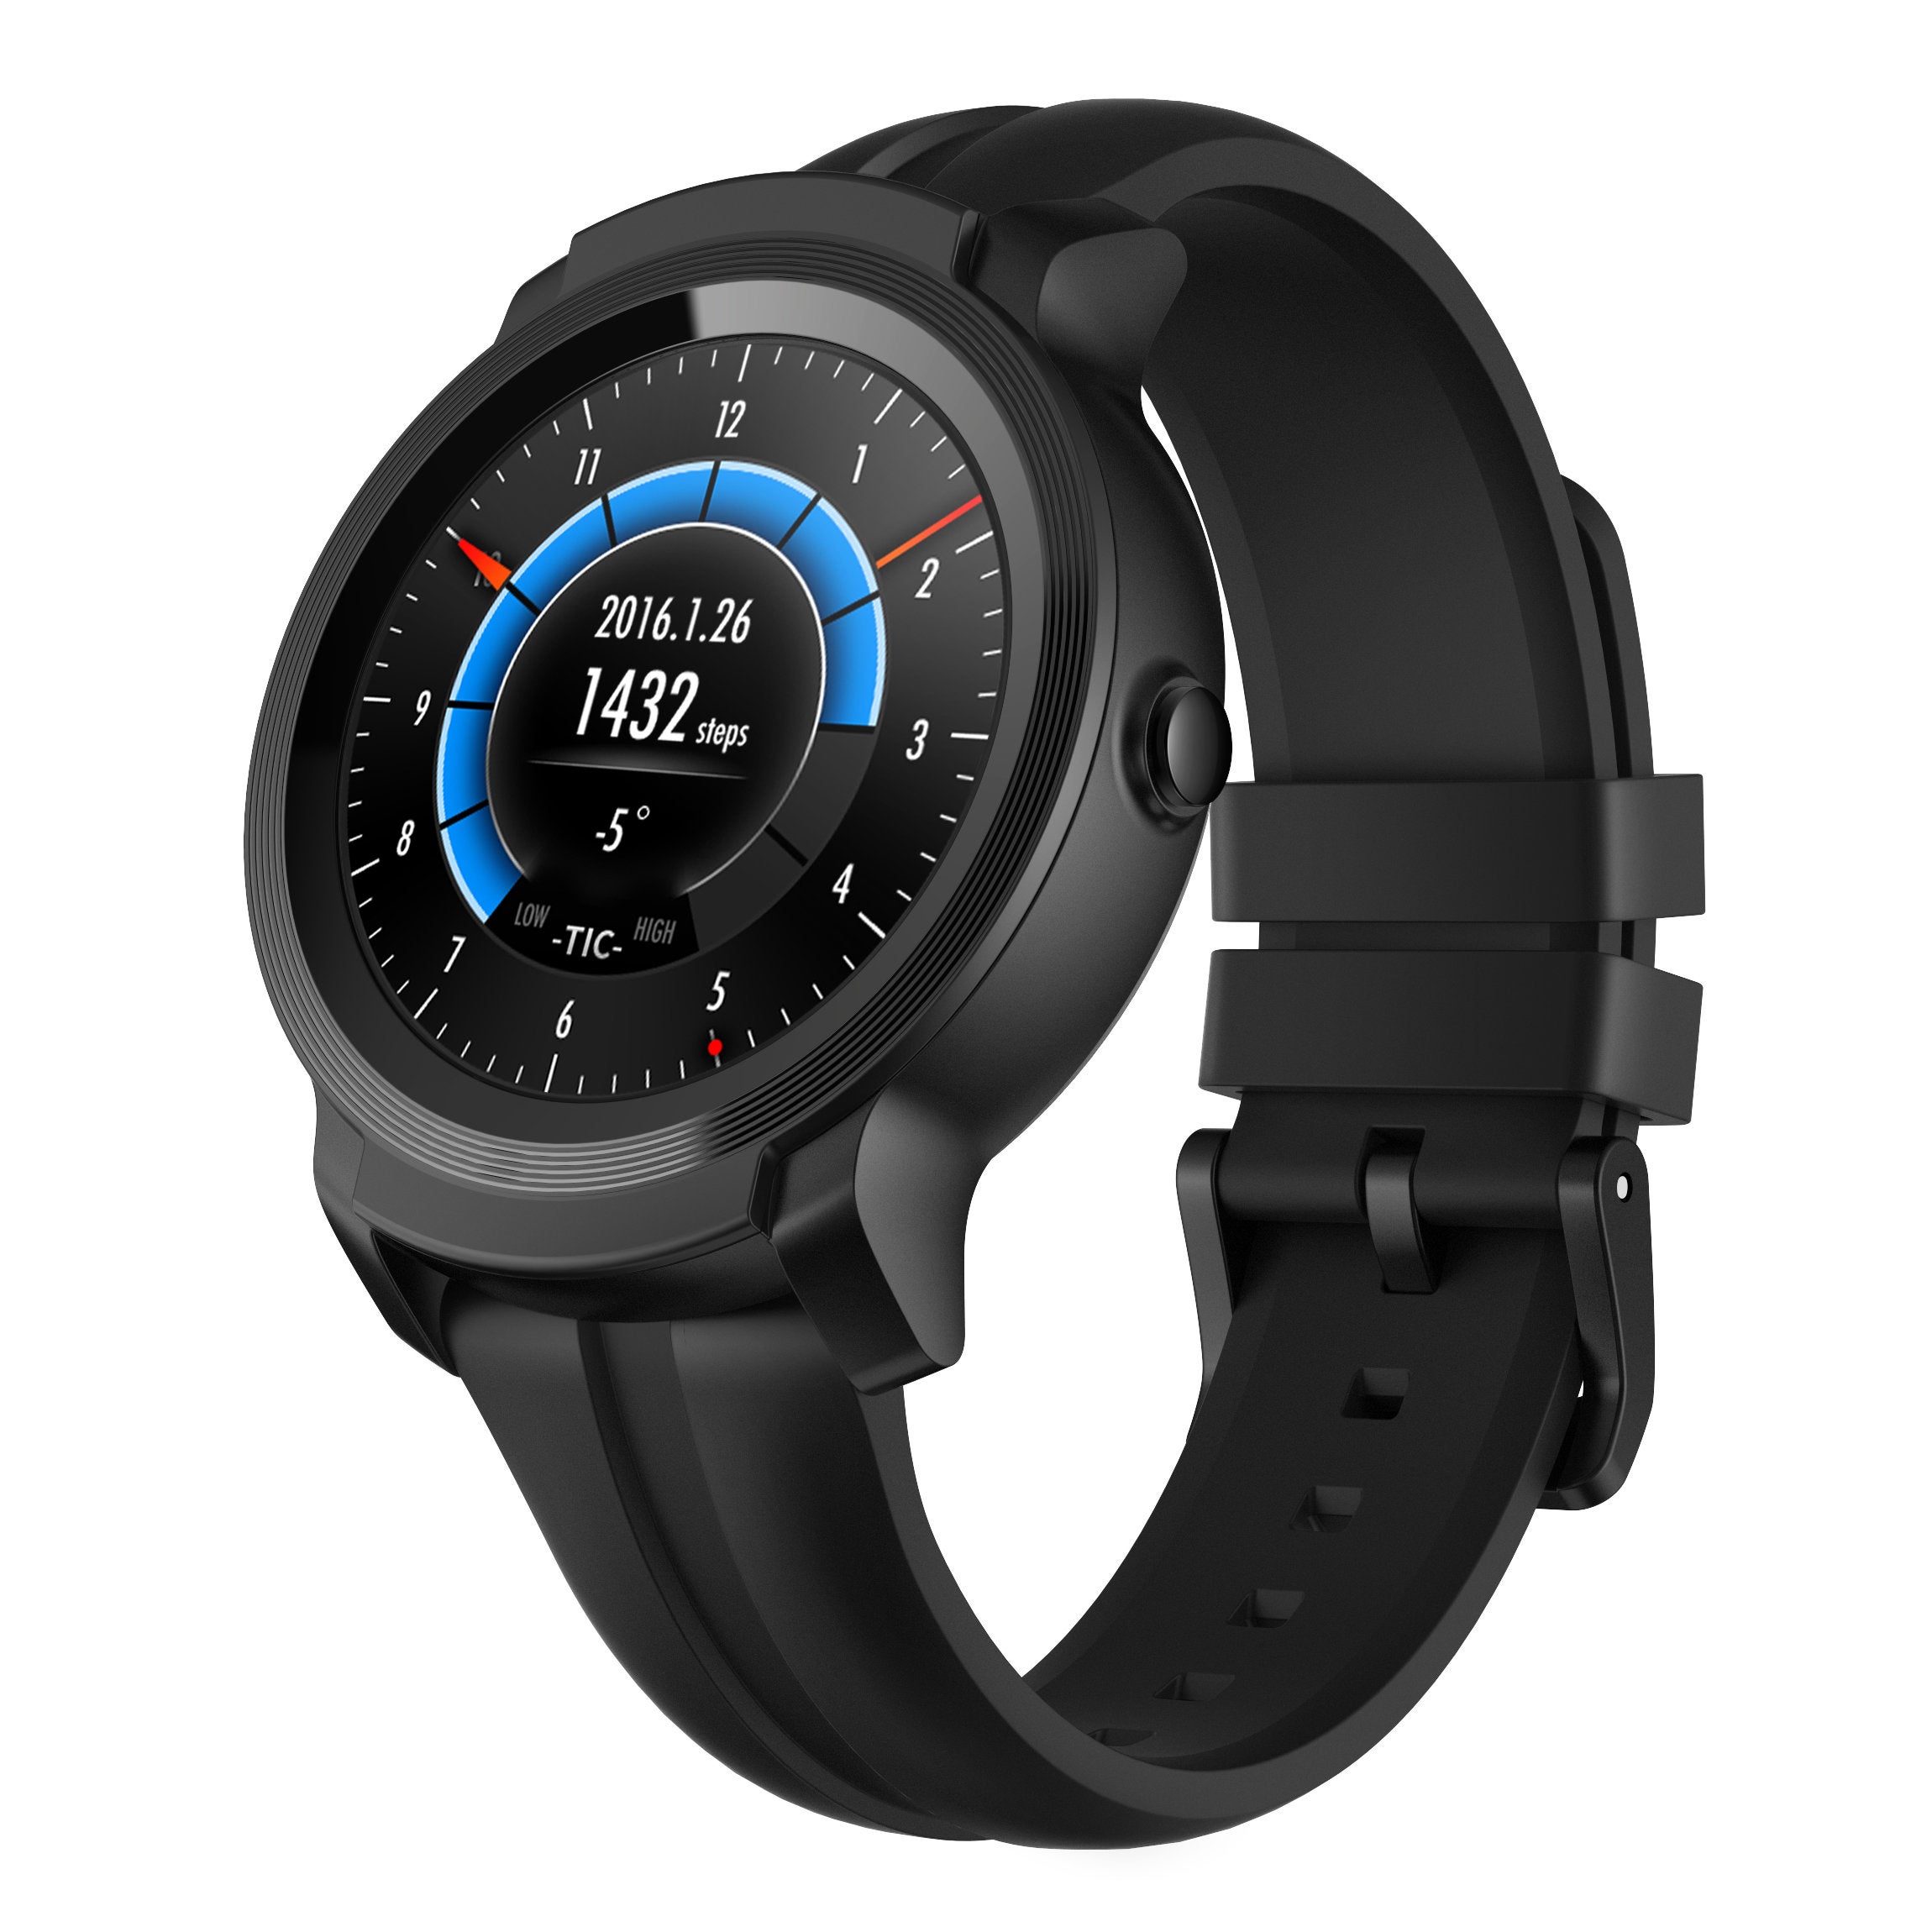 TicWatch E2 - Affordable TicWatch E2 and TicWatch S2 smartwatches now available in the U.S.